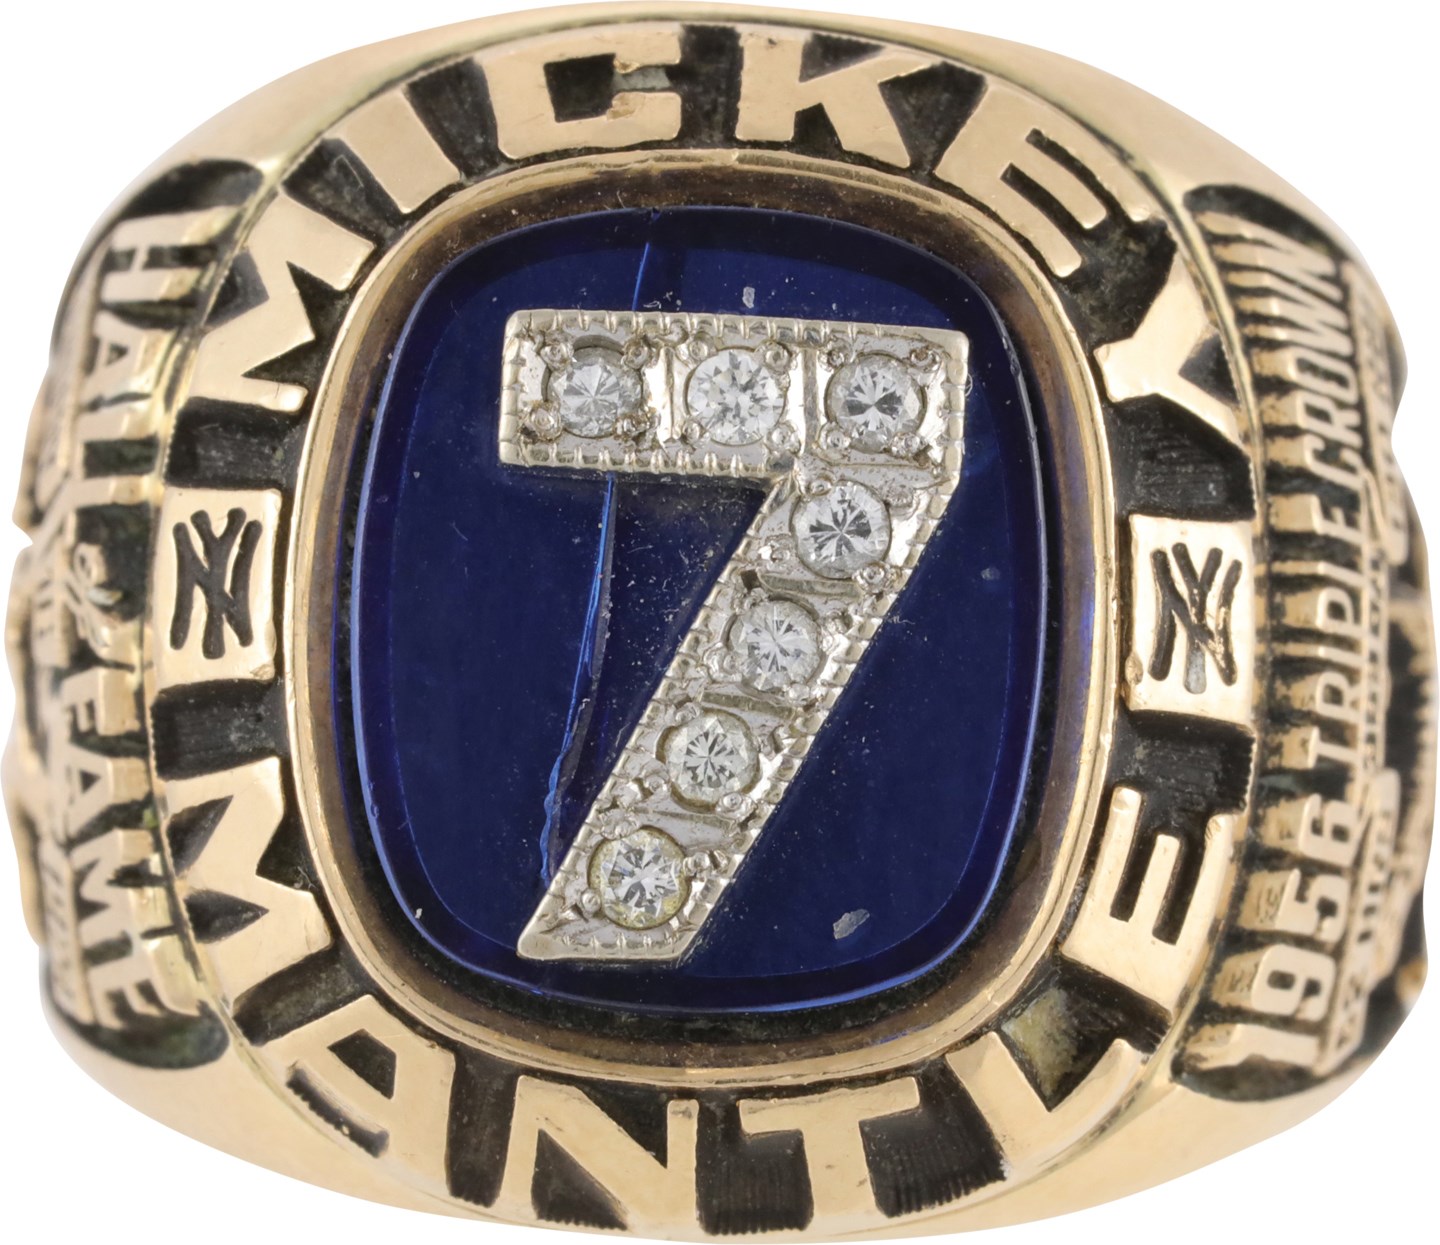 - Mickey Mantle Limited Edition Commemorative Career Ring